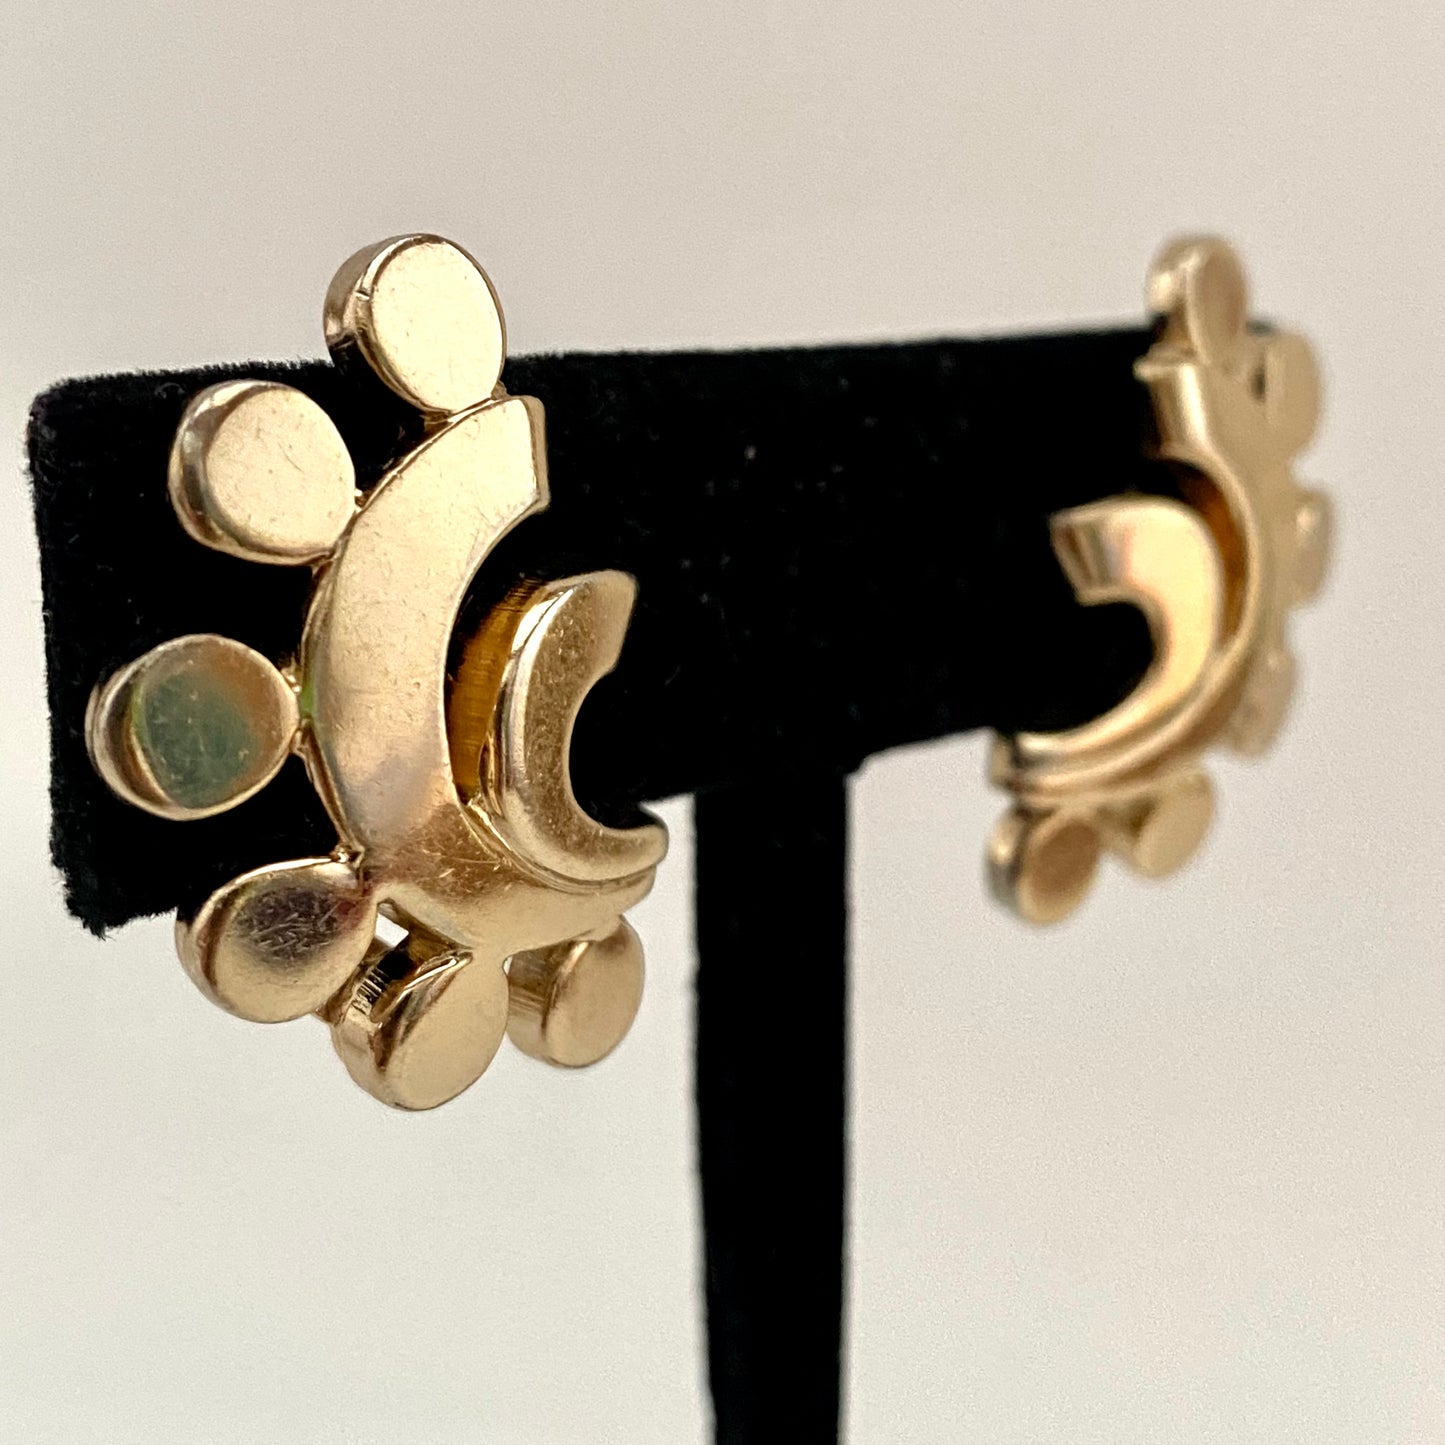 1960s Monet Earring With Patented Clips